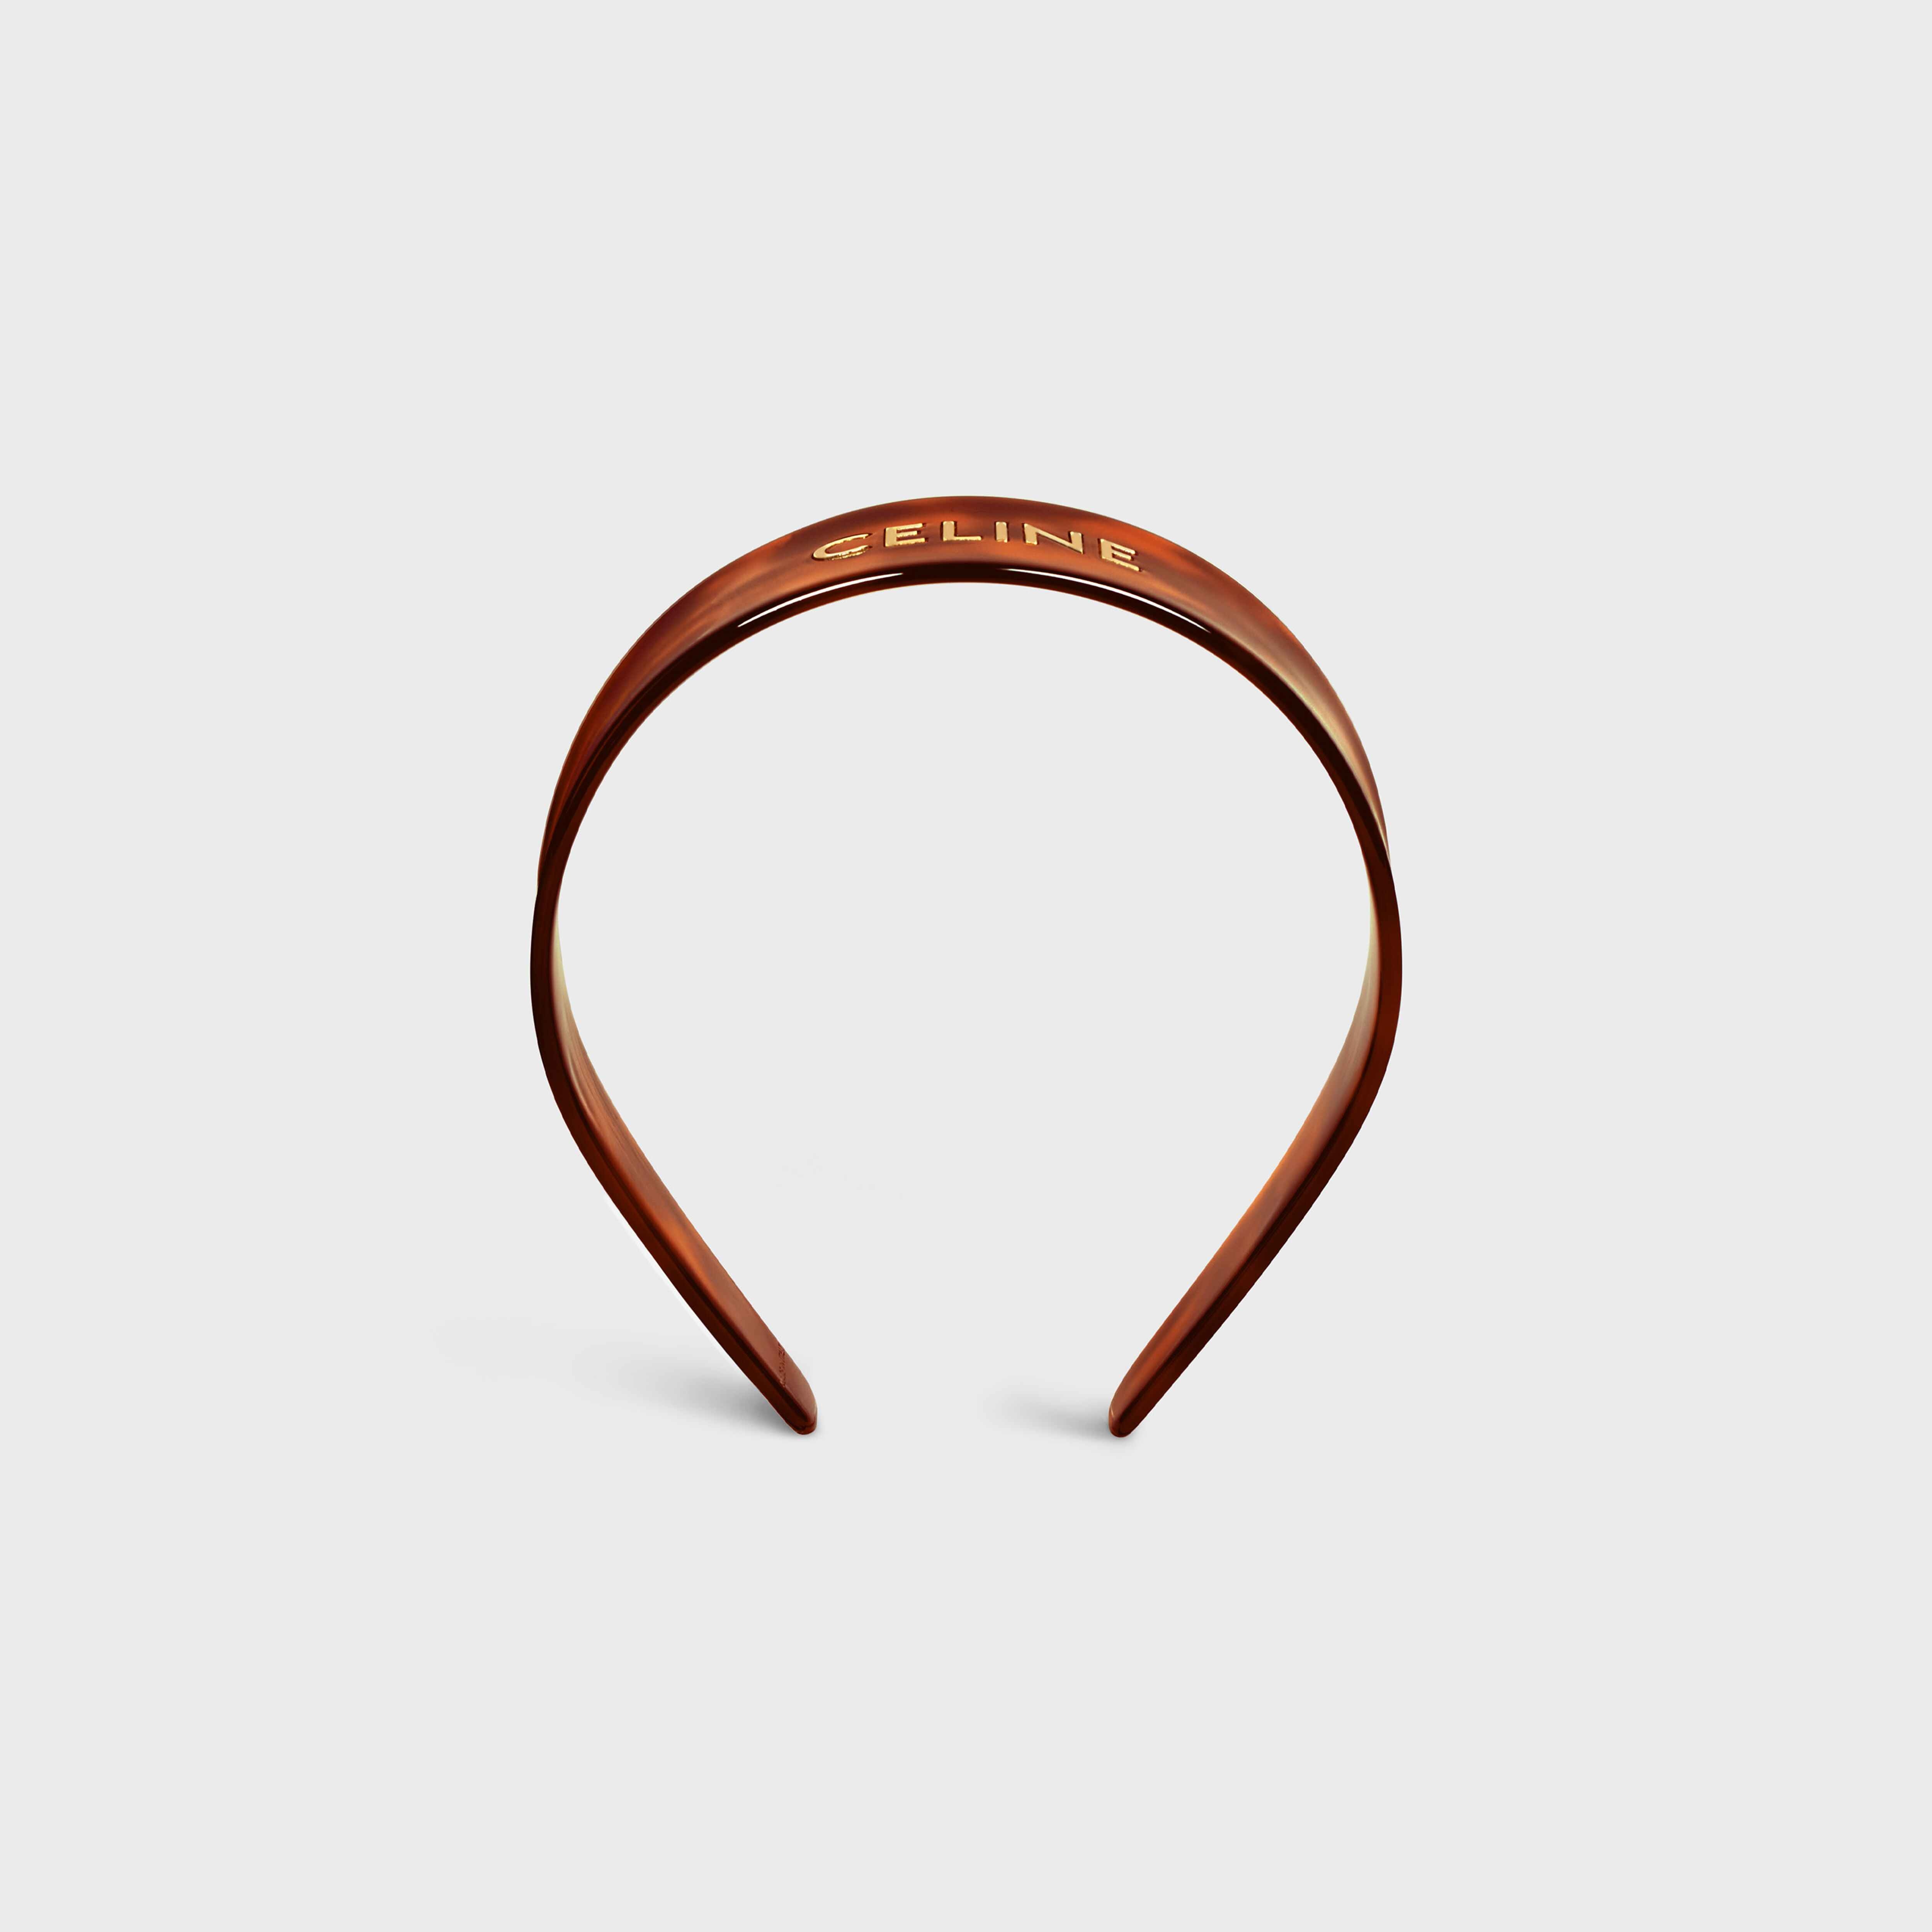 Celine Headband in Blond Havana Acetate and Brass with Gold finish - 1